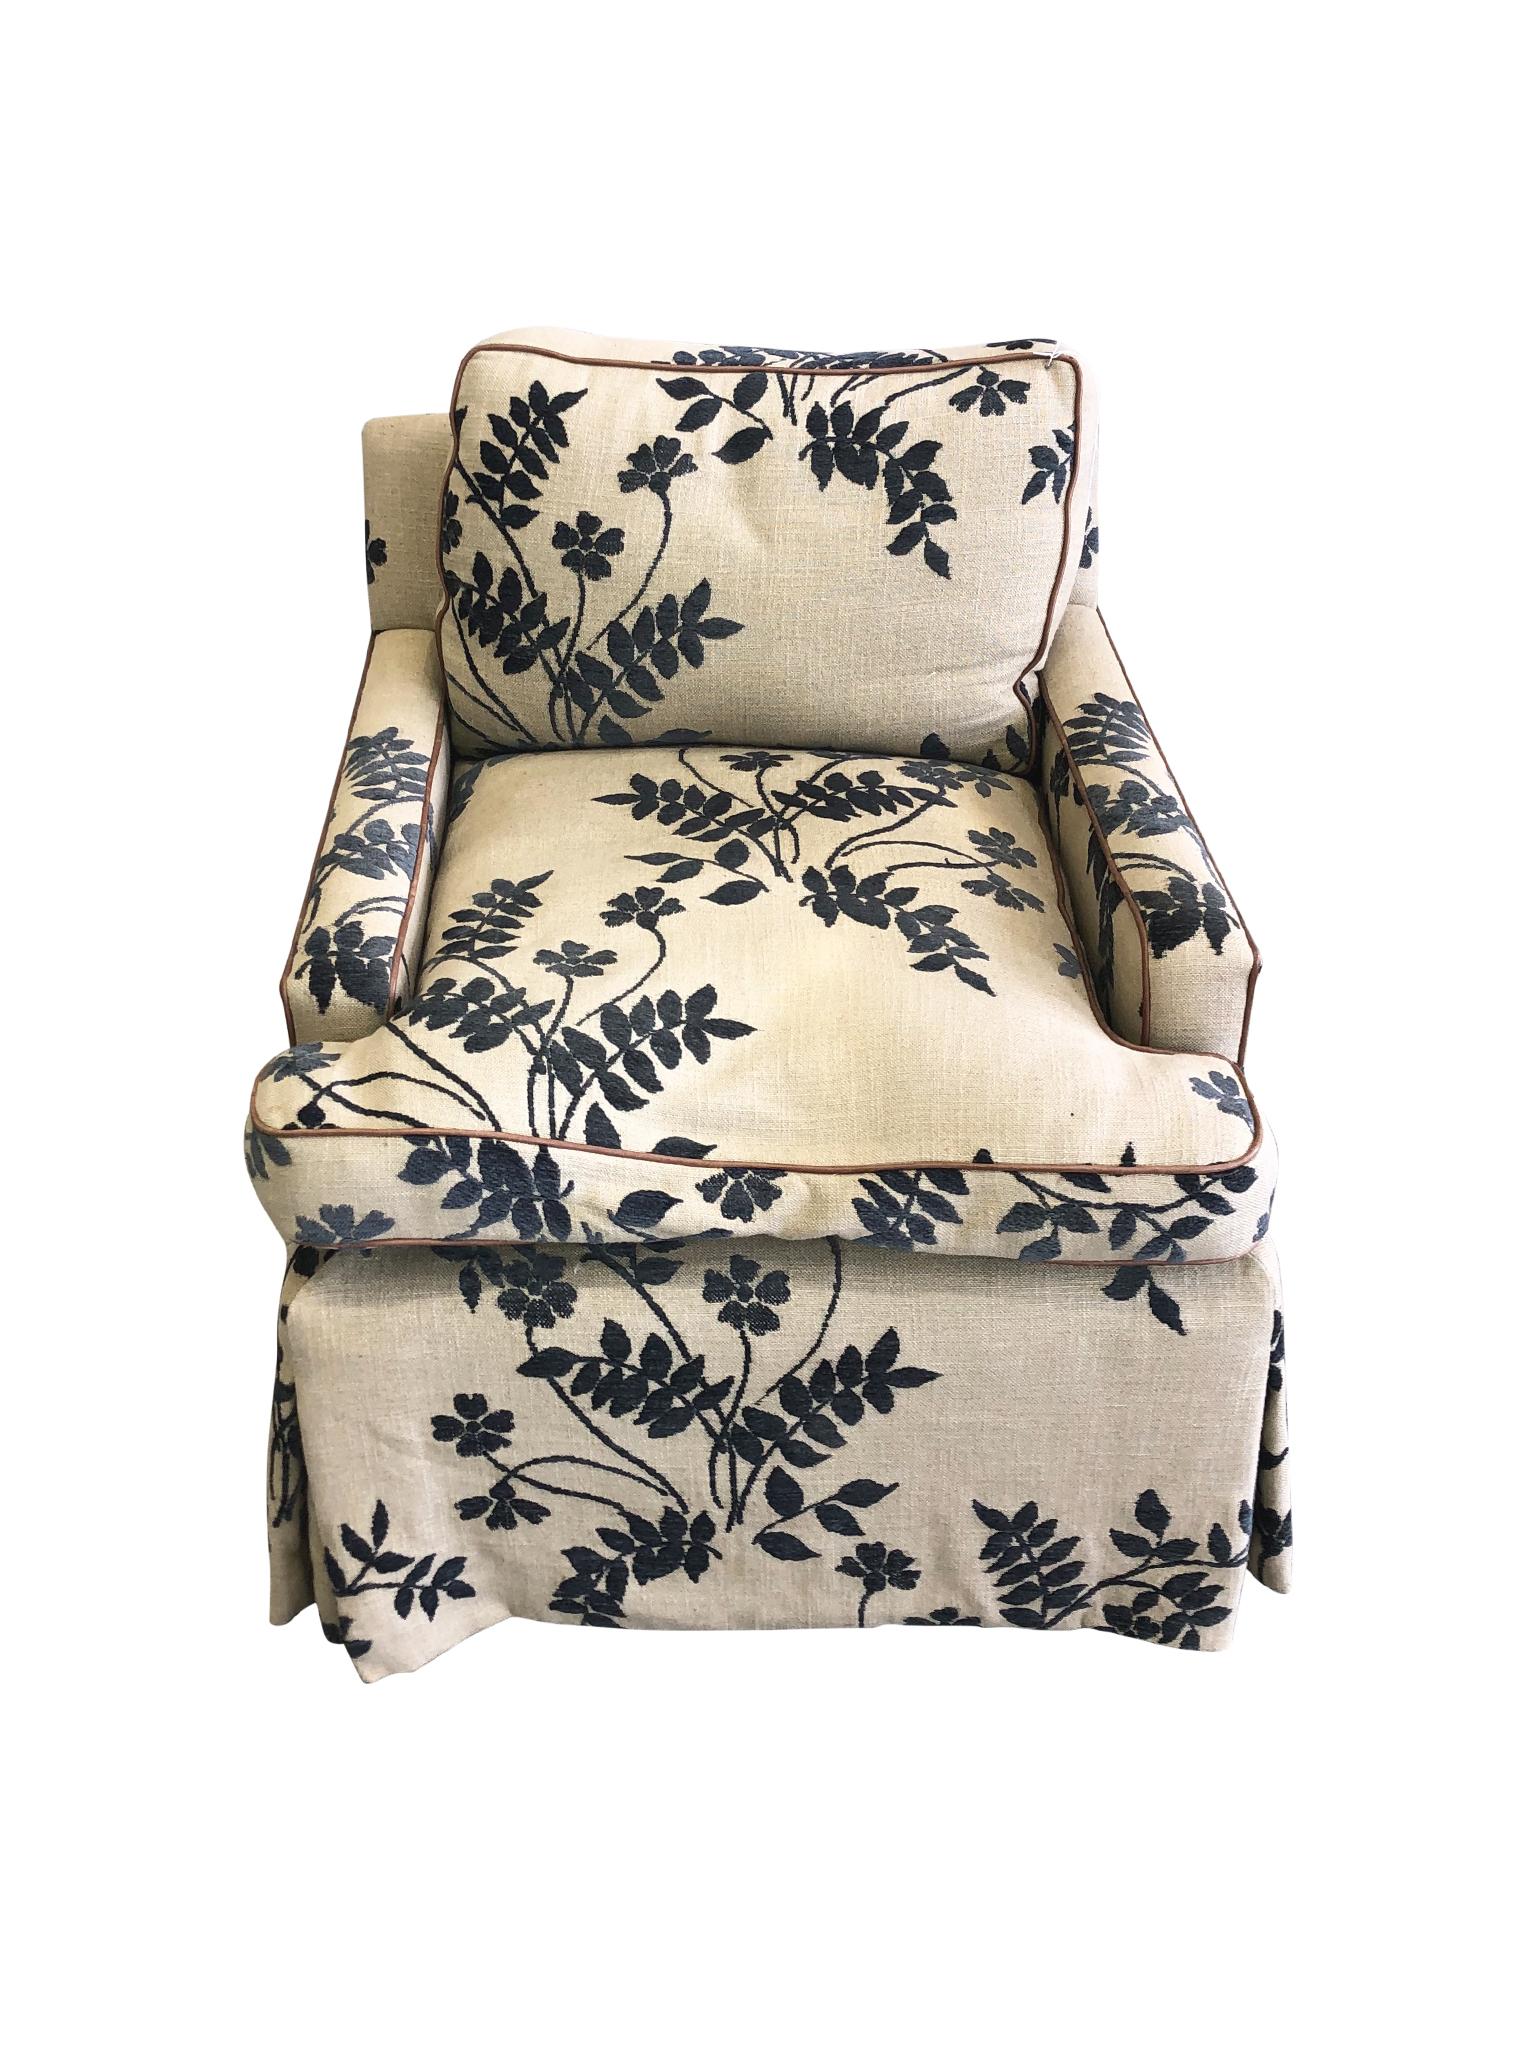 An elegant pair of lounge chairs in the Hollywood Regency style of Billy Haines, 20th century. The chairs are upholstered in a linen fabric with navy-blue embroidered botanical and floral motifs. They have a classic shape with seat and back cushions